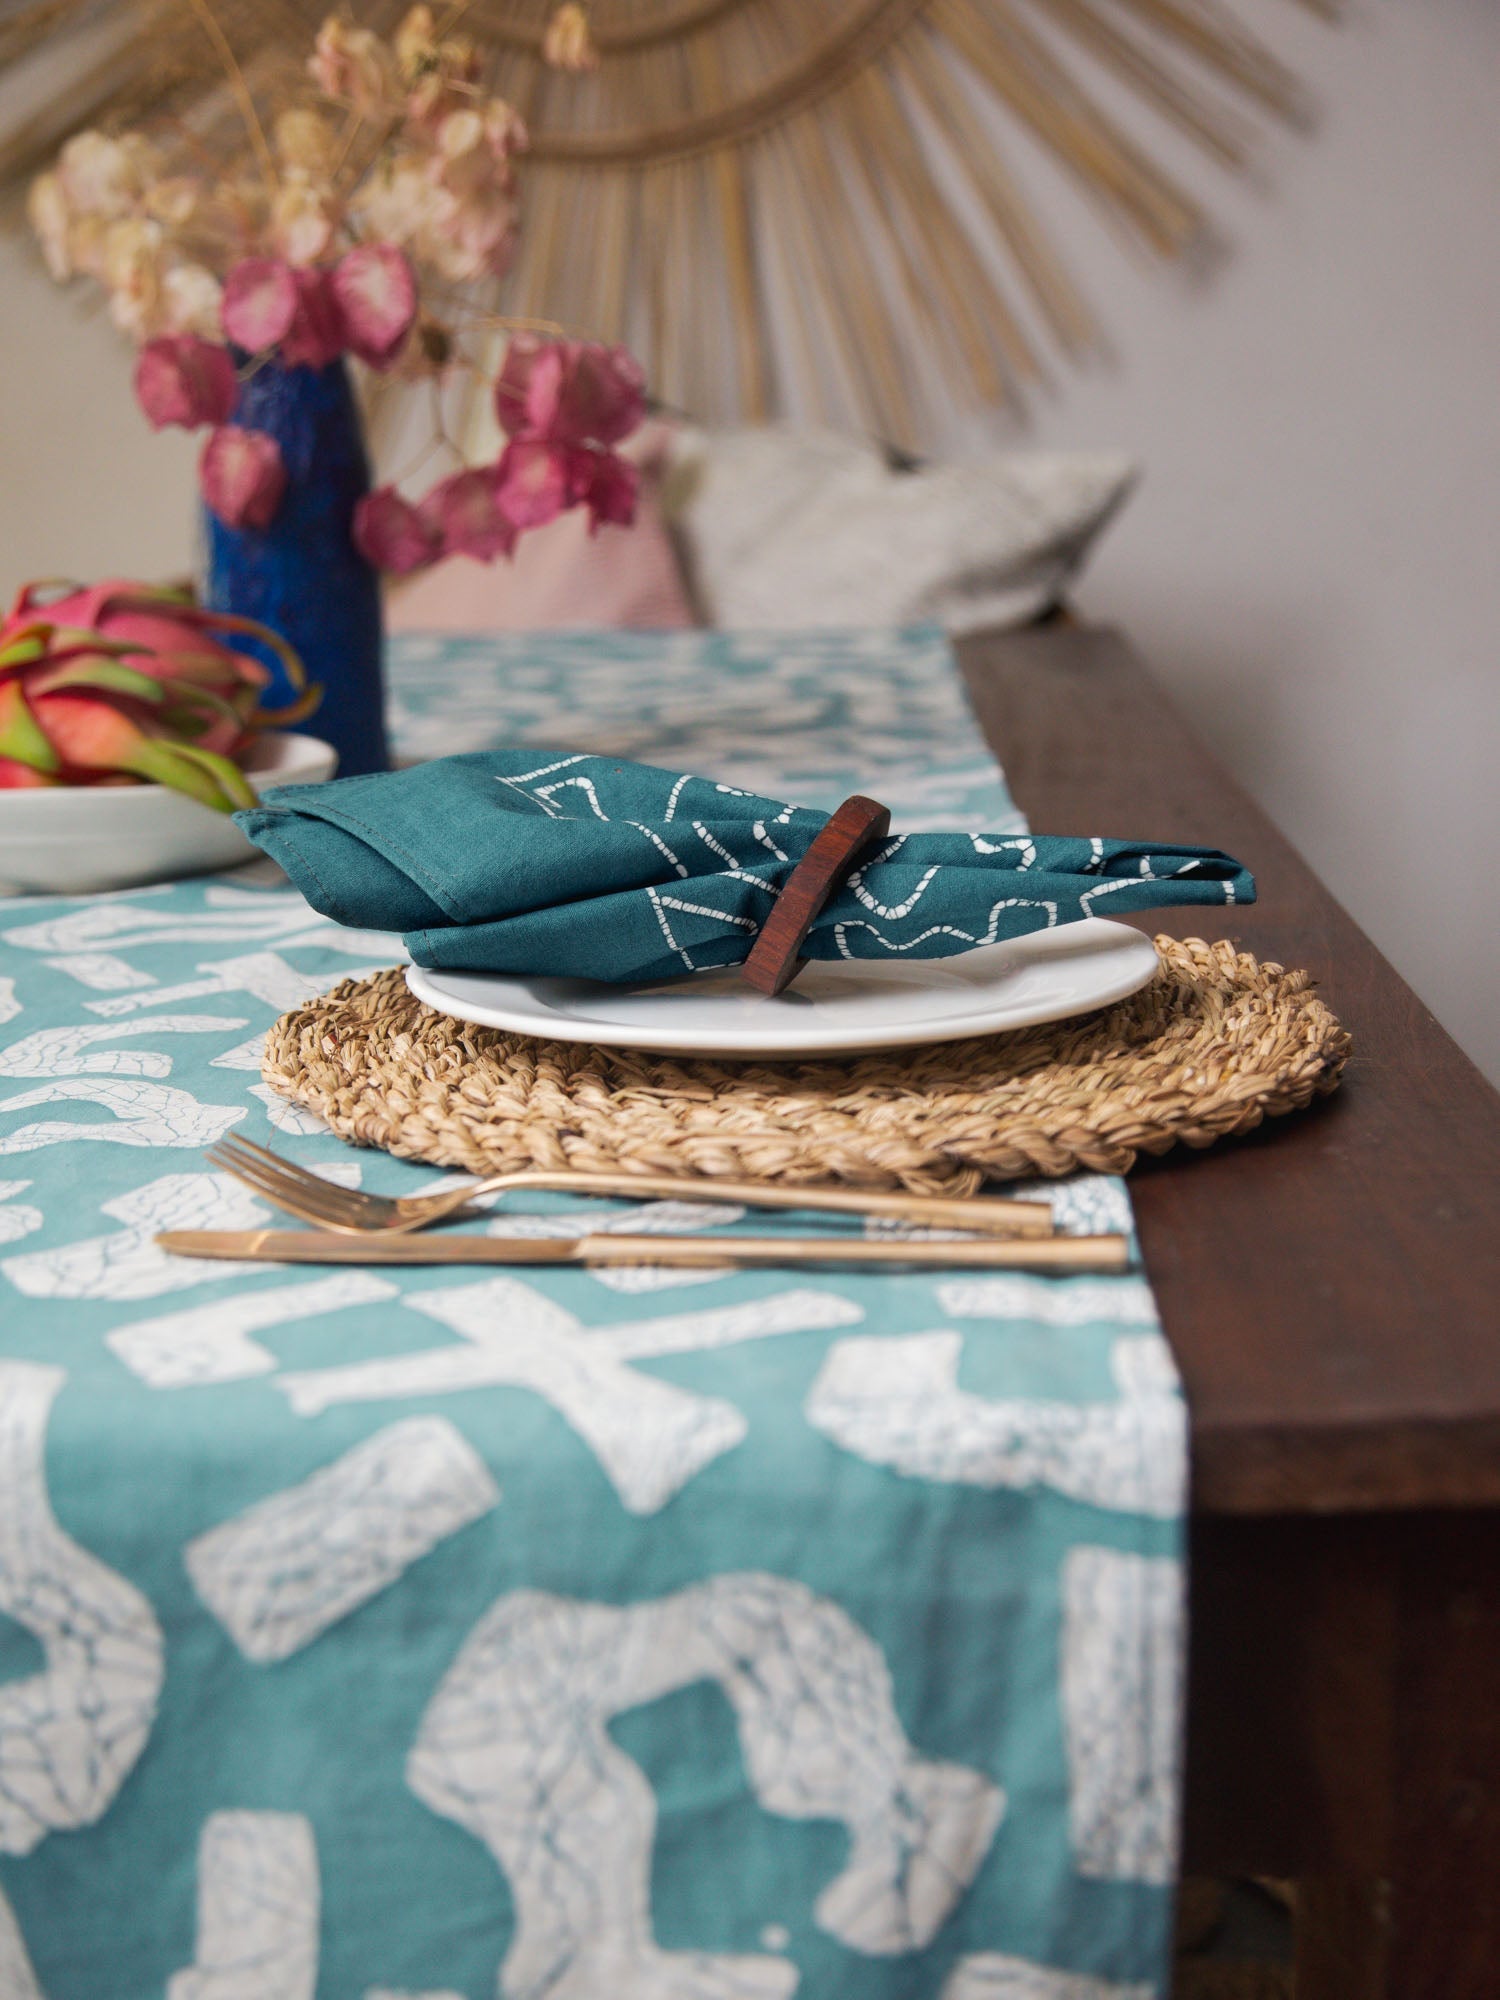 The perfect teal napkins, in our signiture Kuba squiggle pattern.